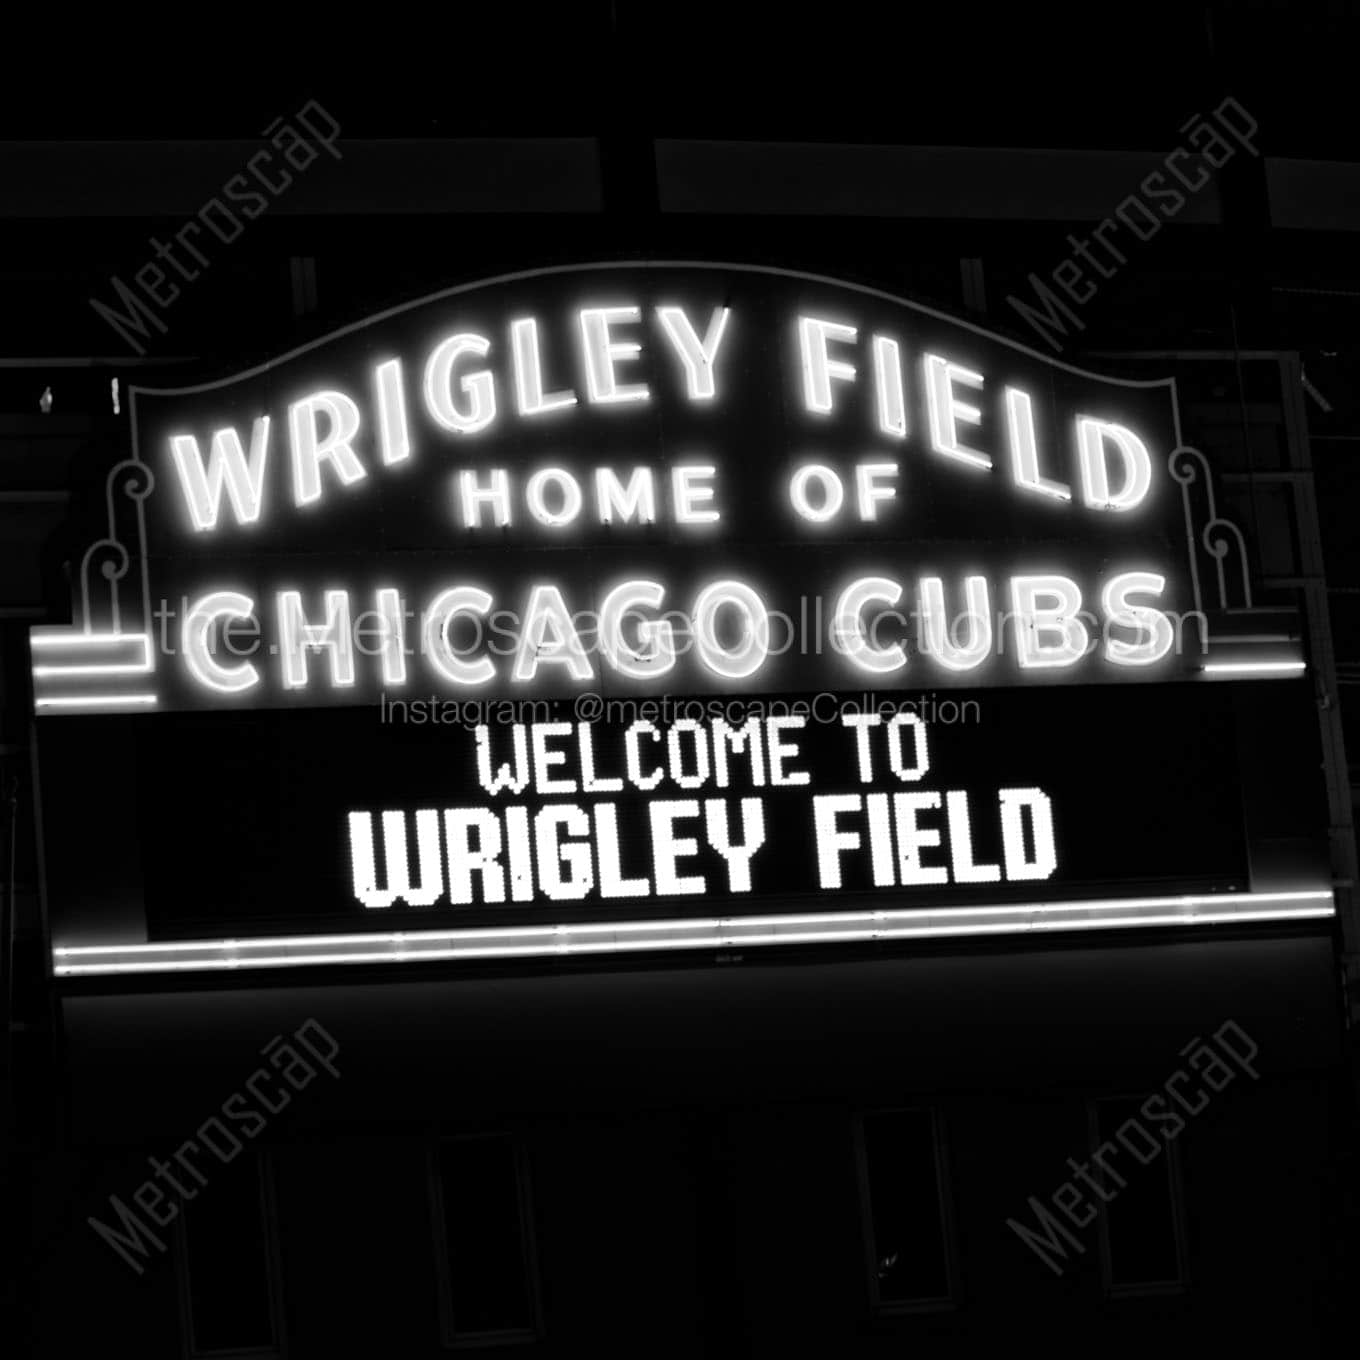 wrigley field home of chicago cubs Black & White Wall Art